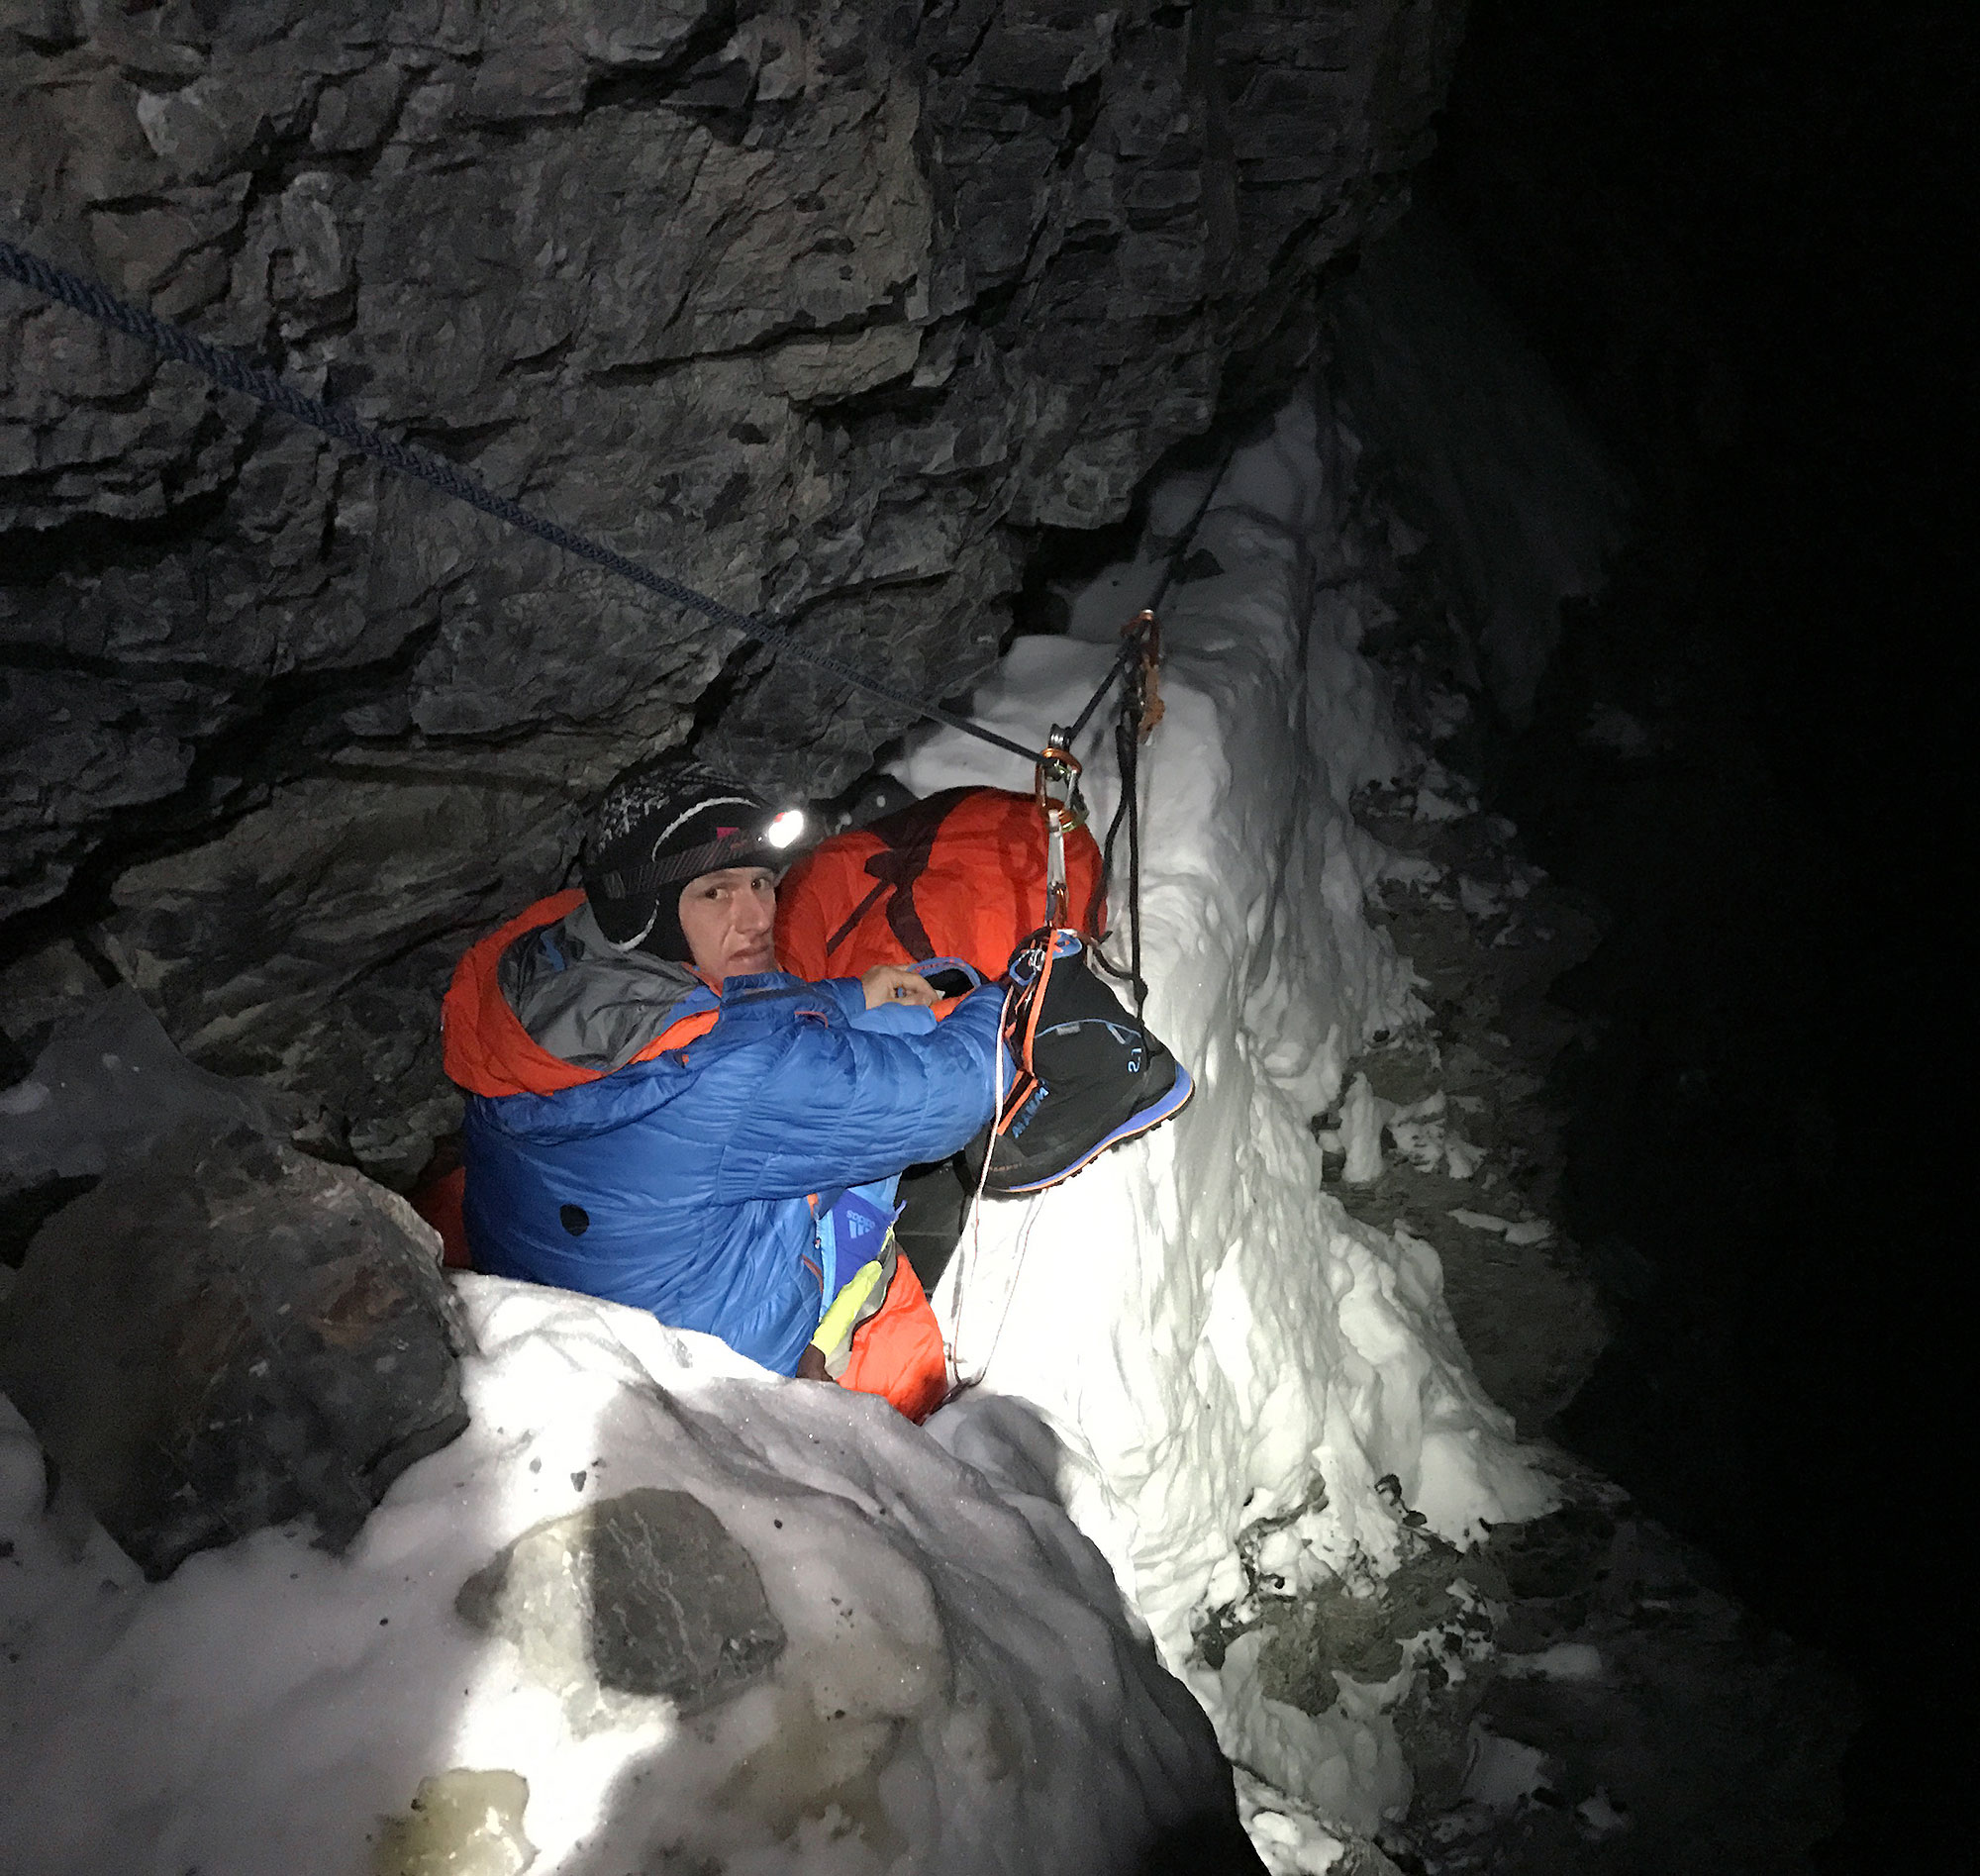 Stephan Siegrist trying to grab some sleep during a frigid night at the “Eagle’s Nest” bivy. Photo © Thomas Huber/Roger Schaeli/Stephan Siegrist